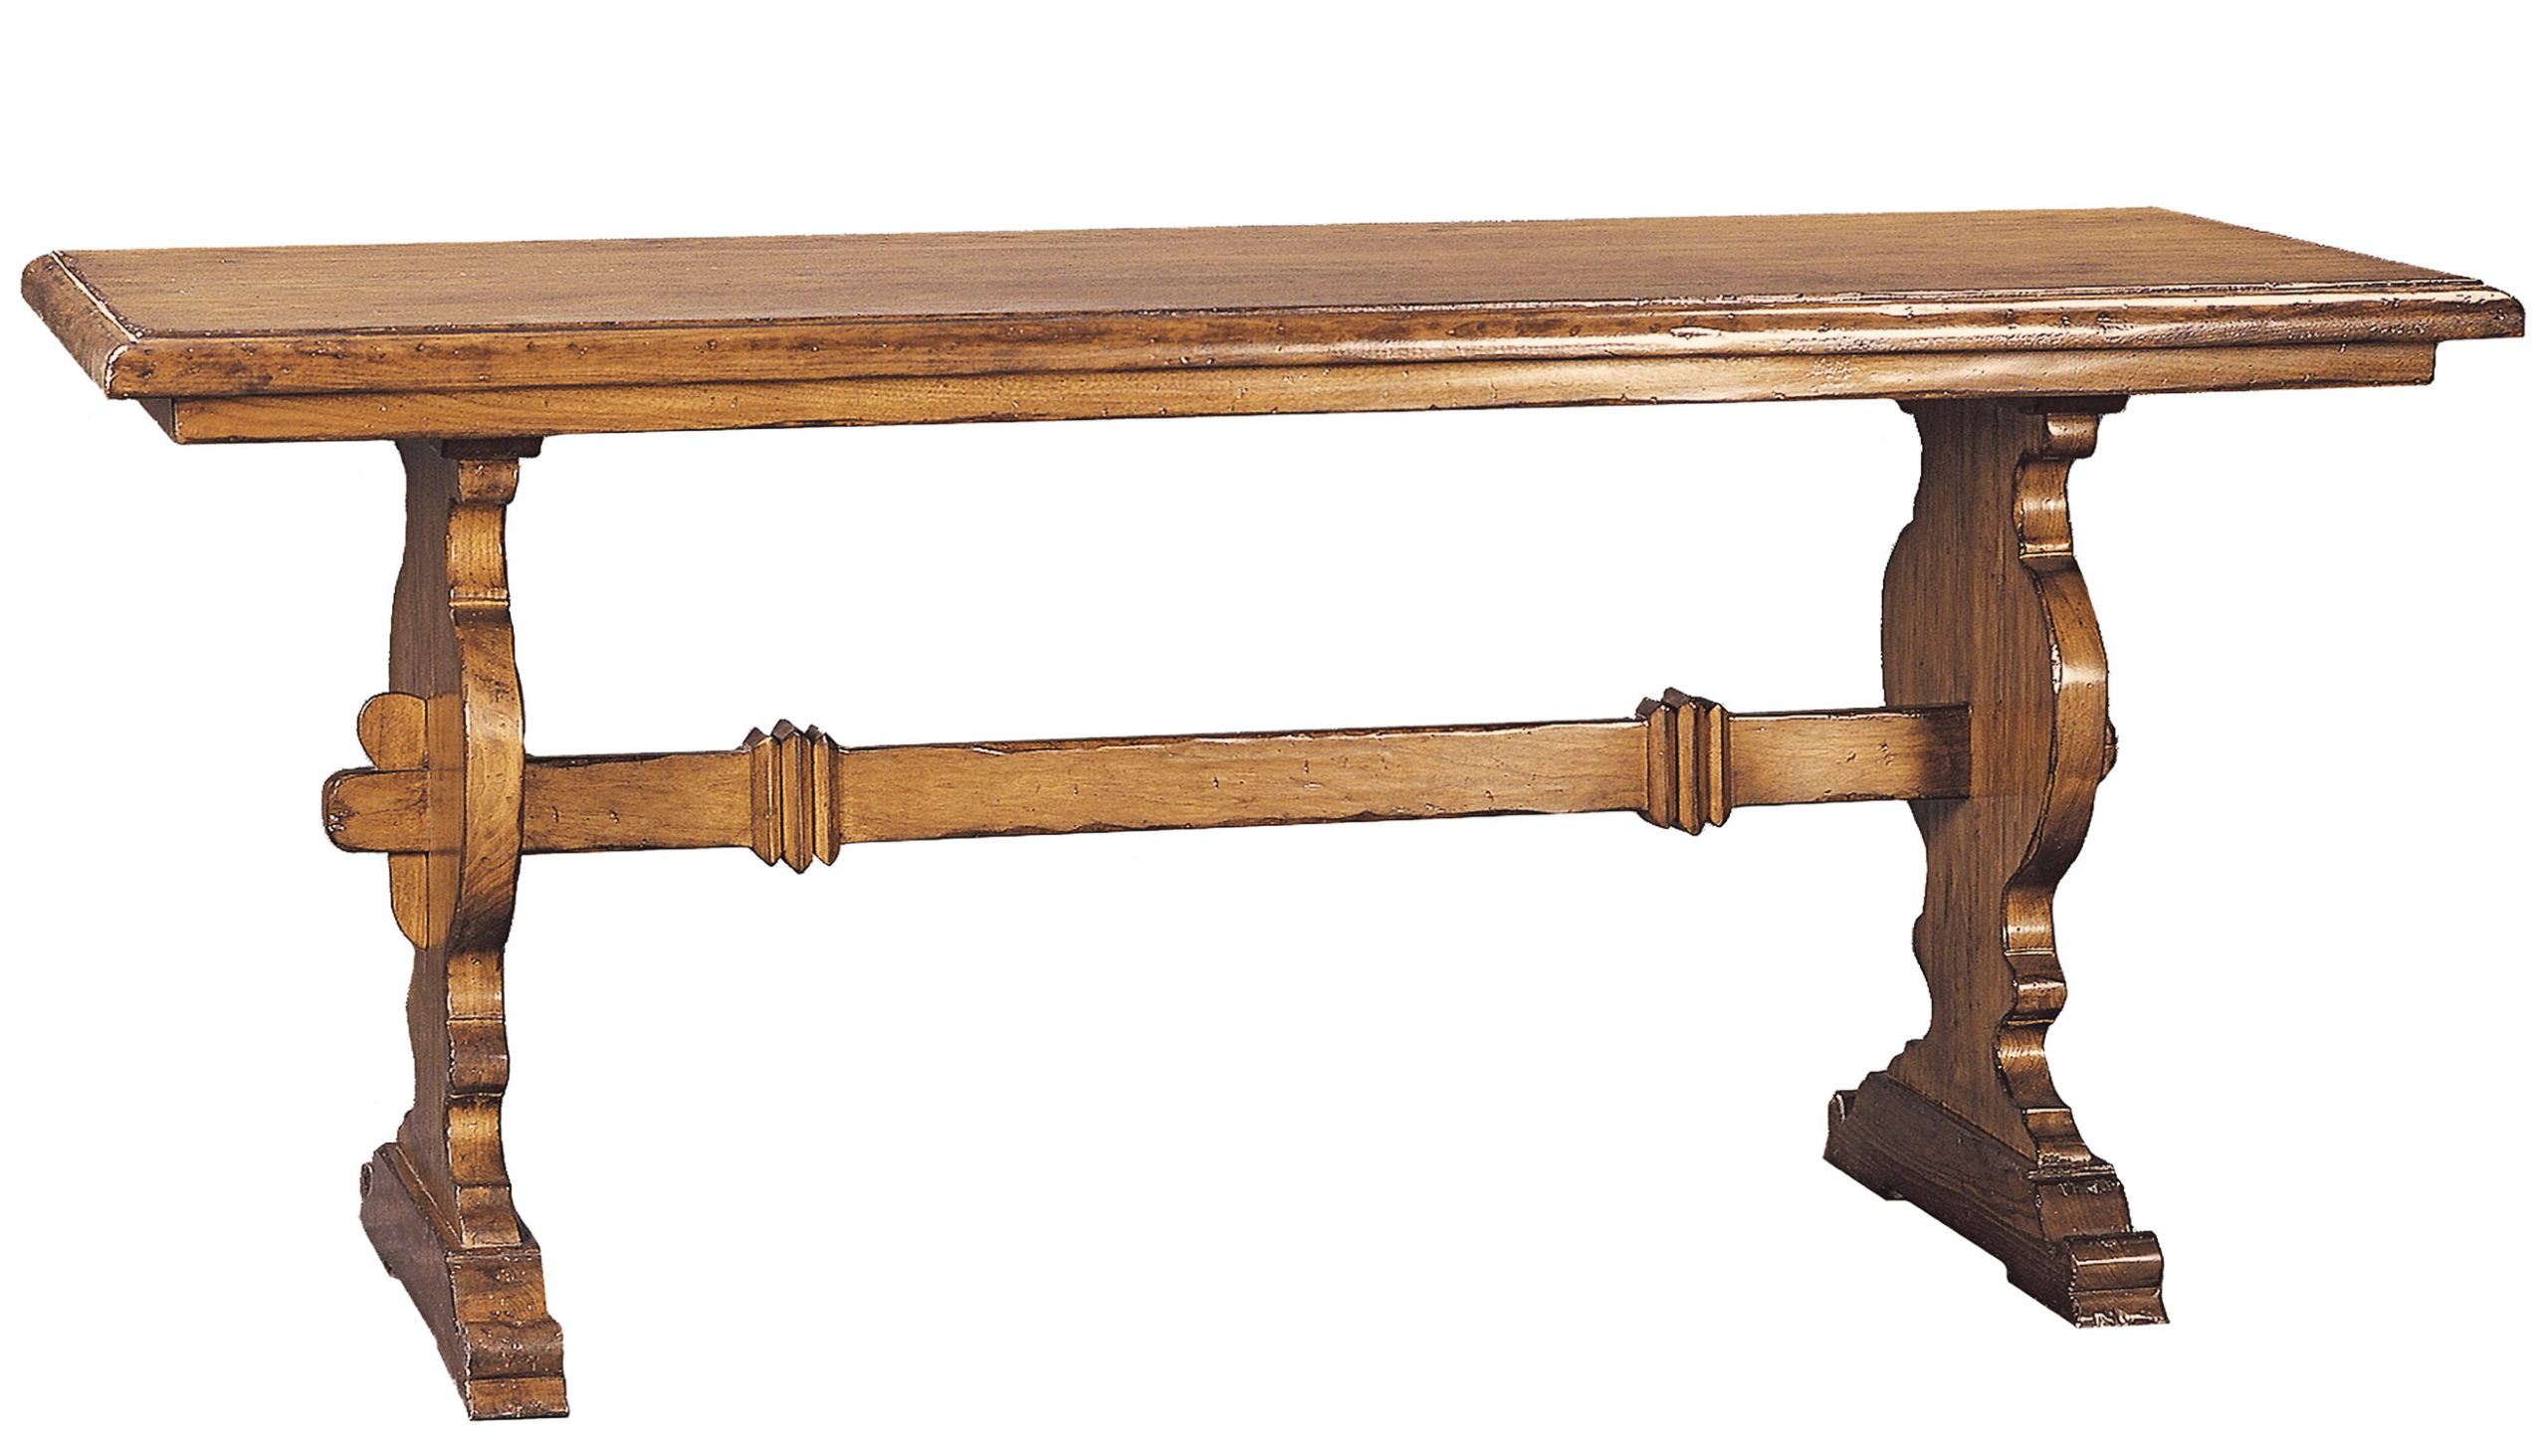 Cooper traditional trestle sofa table console by Woodland furniture in Idaho Falls